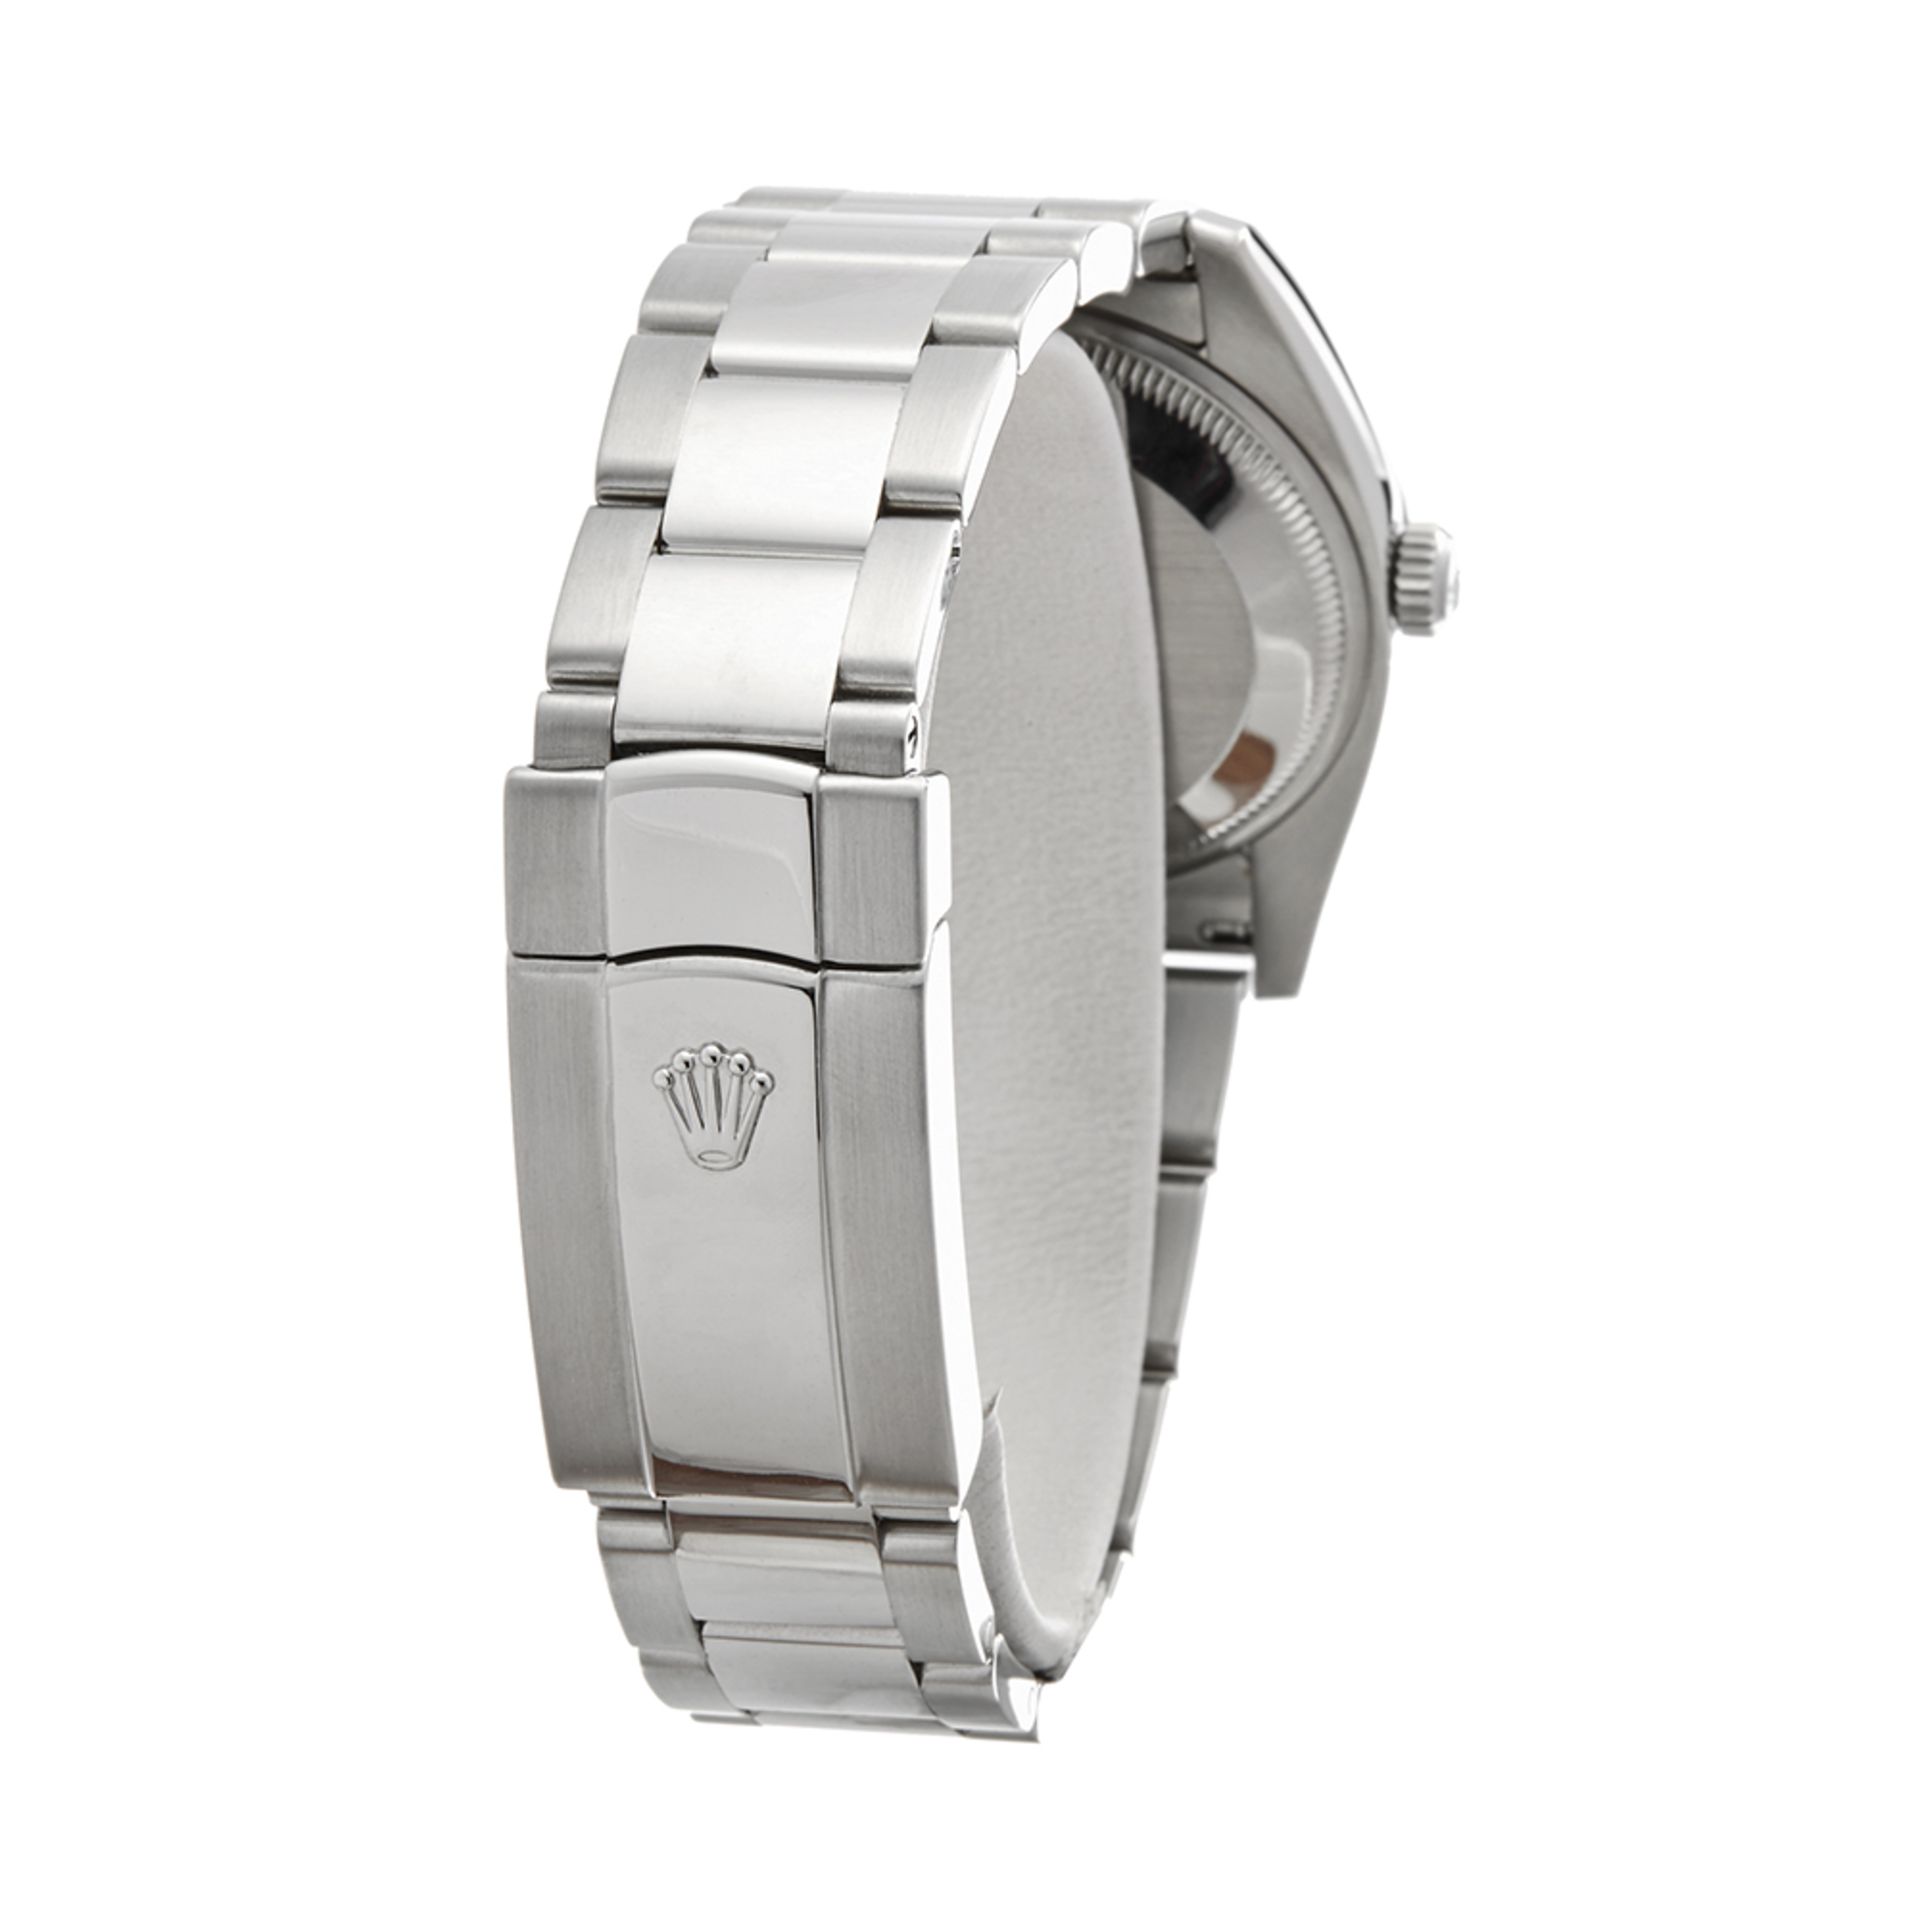 Rolex Oyster Perpetual Date 34mm Stainless Steel - 115234 - Image 6 of 8